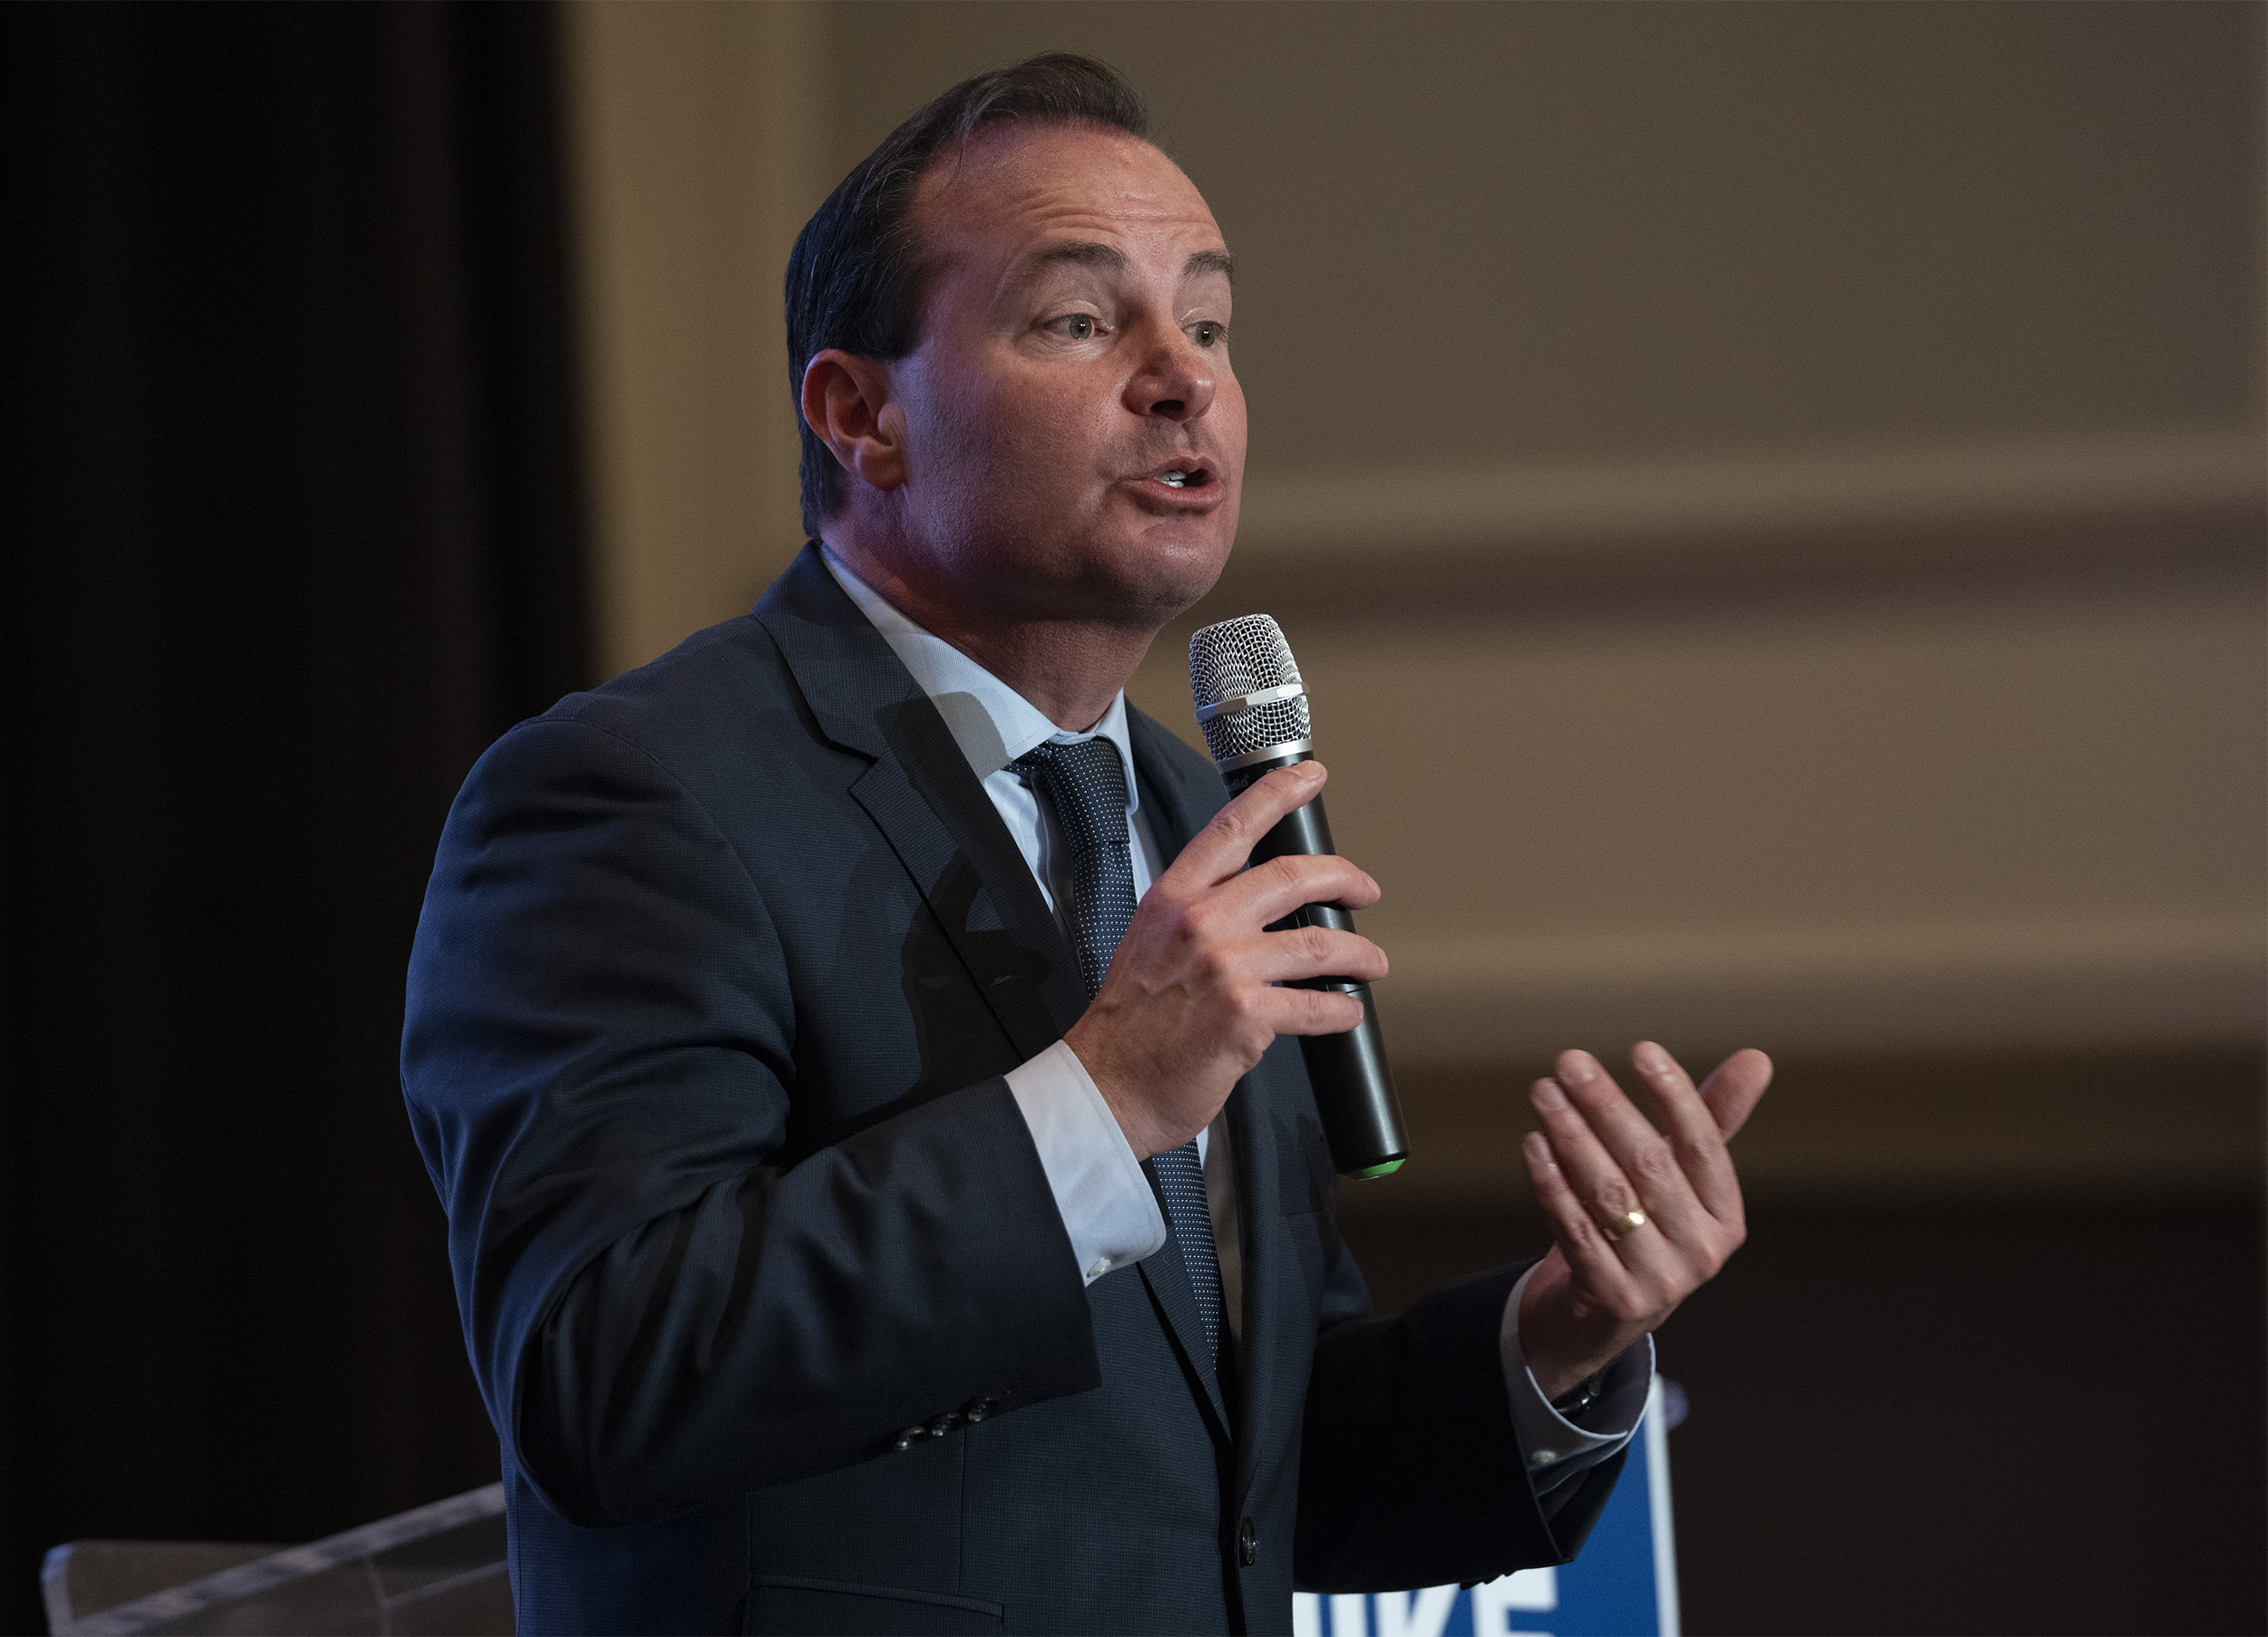 Sen. Mike Lee's 62% primary win: The incumbent might be sweating a little